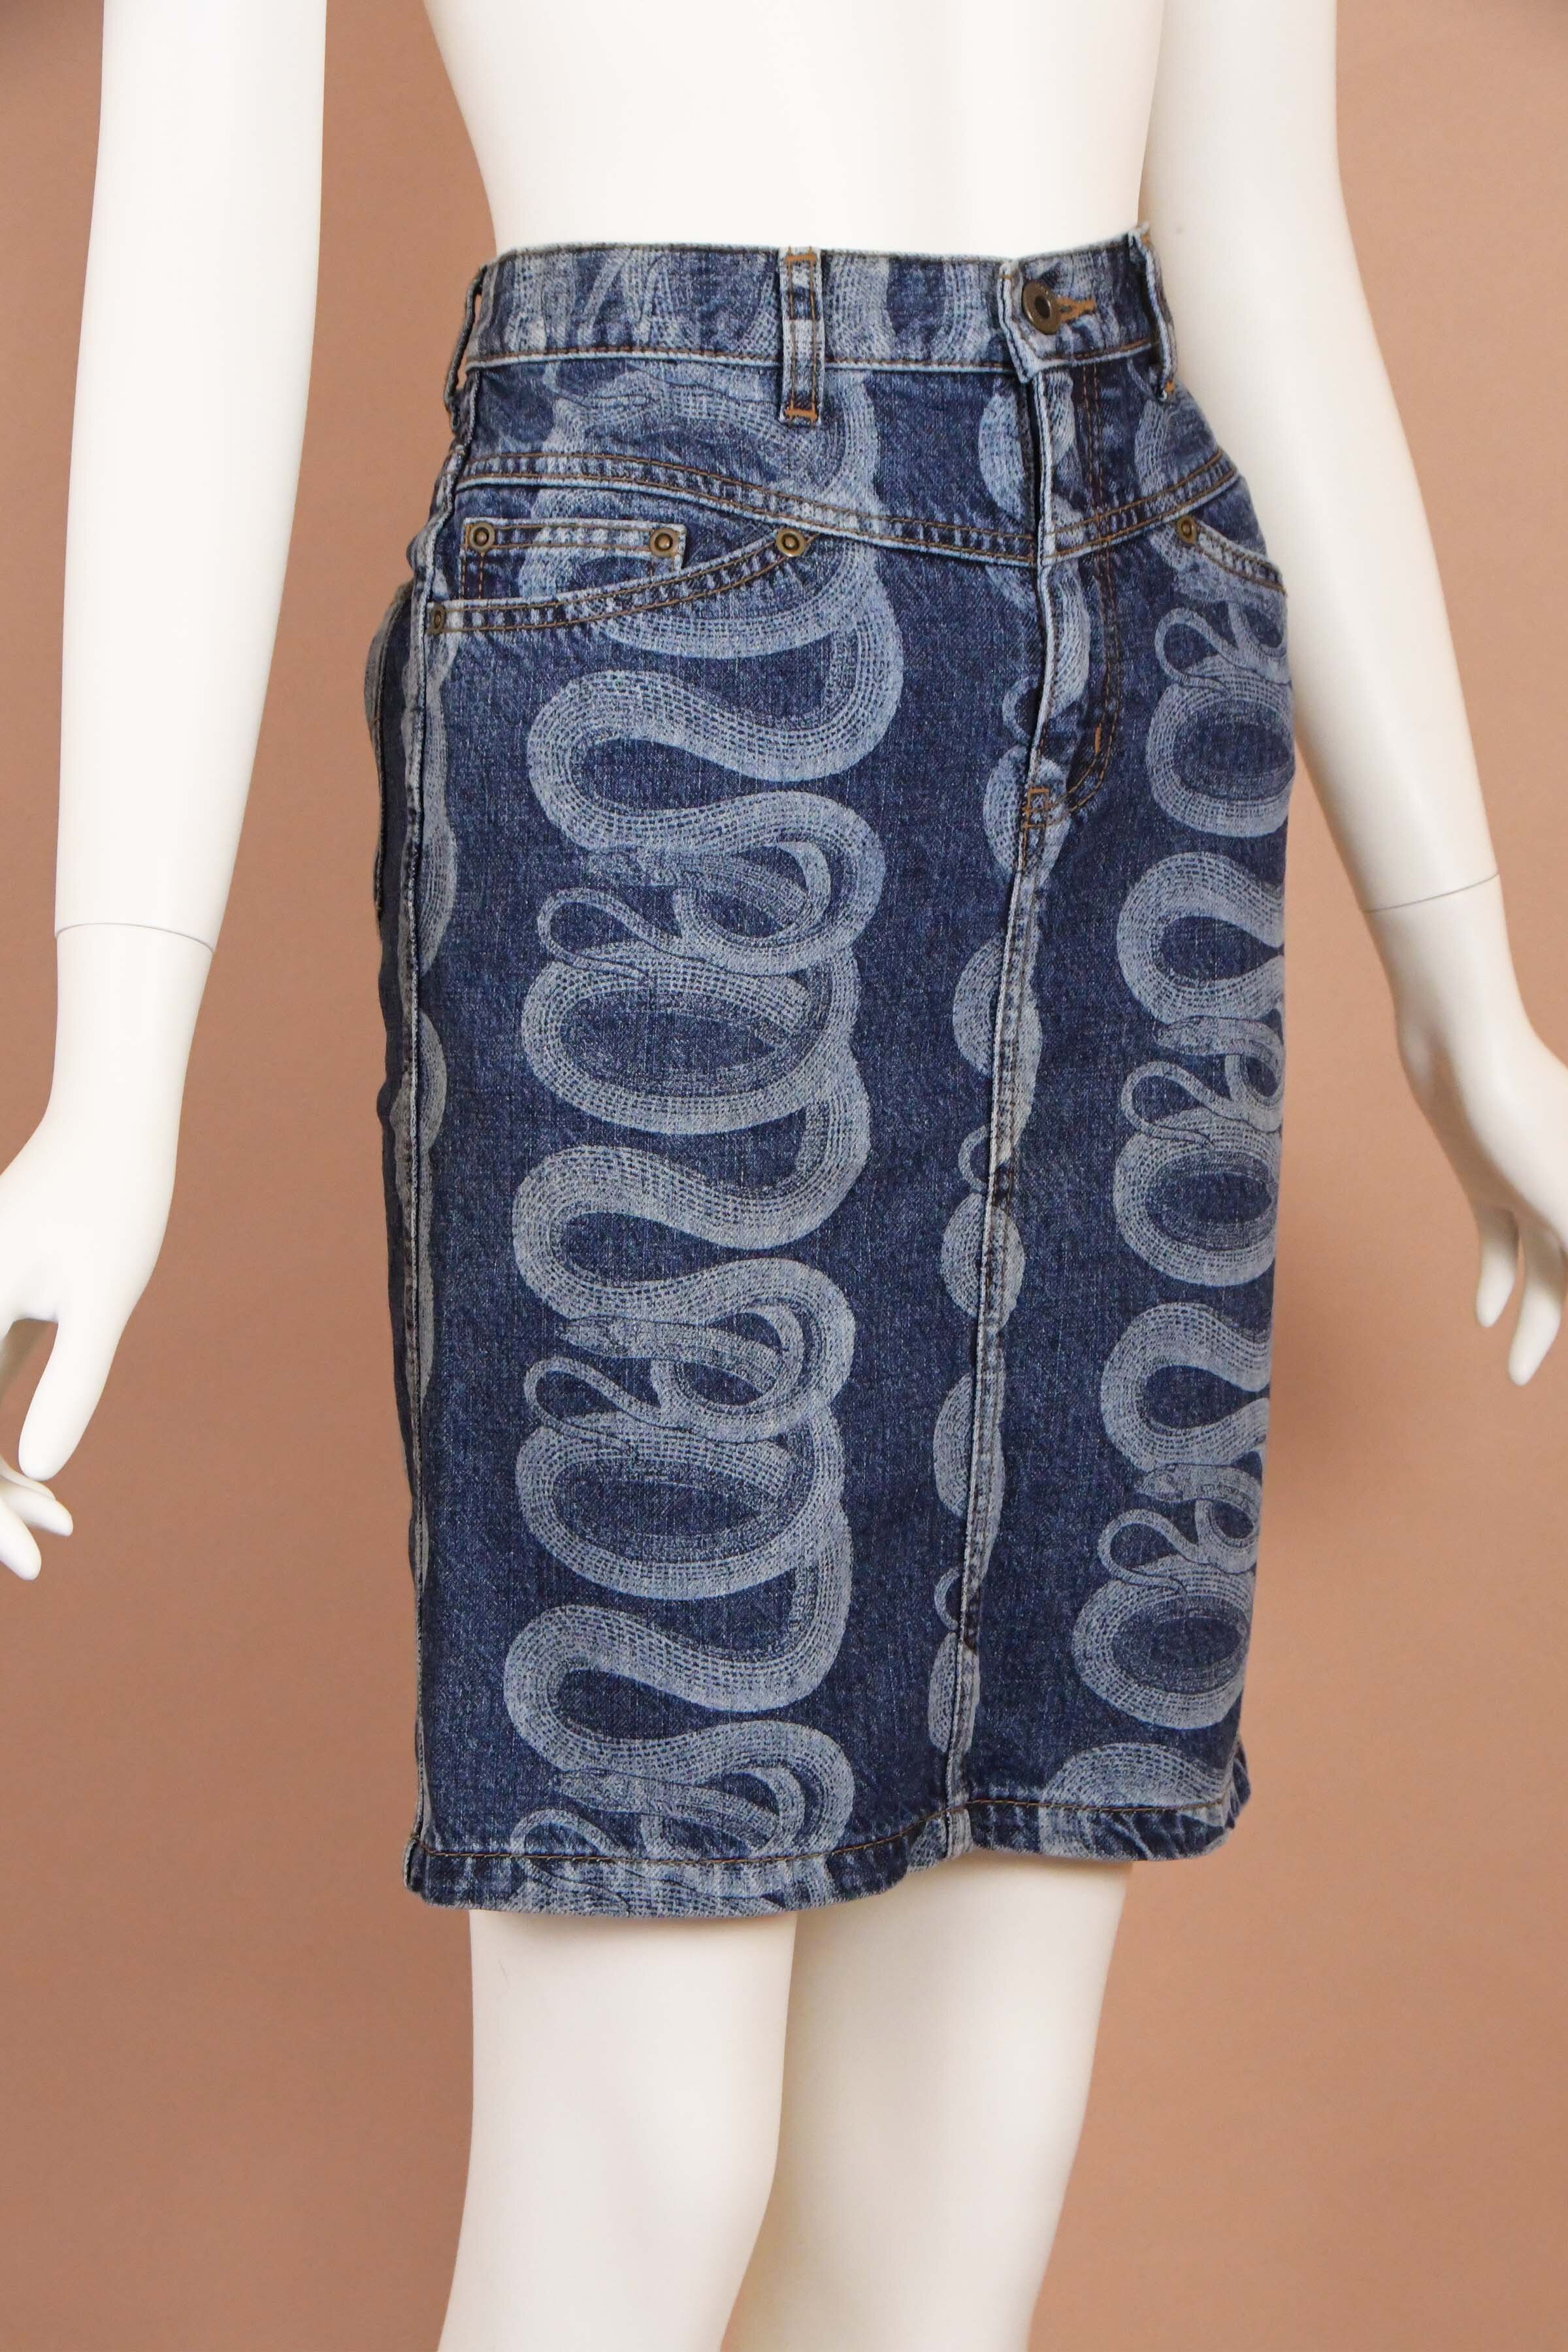 Hysteric Glamour Iconic 90s Snake Print Denim Skirt (XS/S) — Boontique